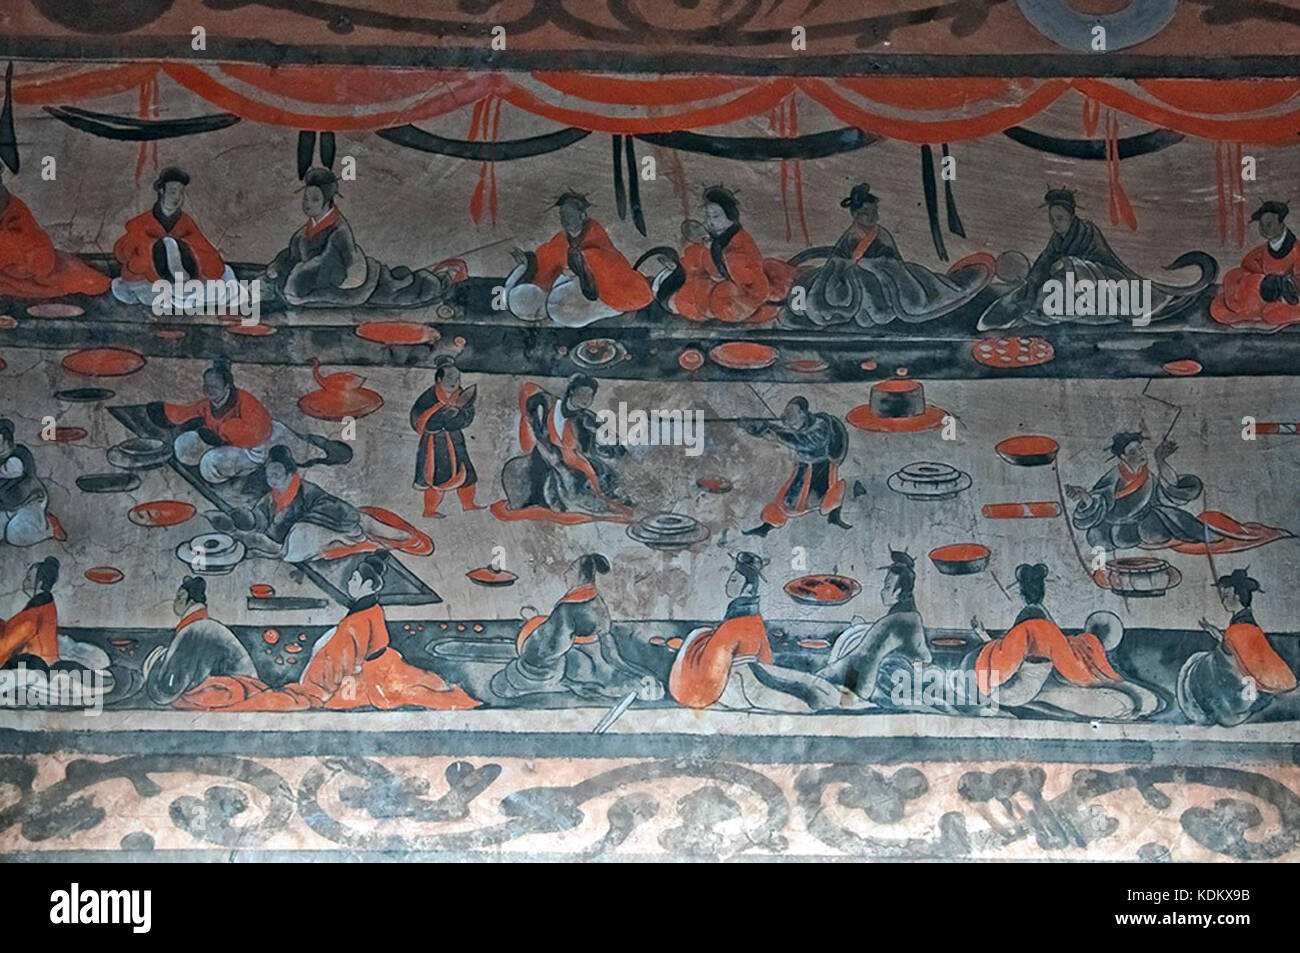 Mural Painting of a Banquet Scene from the Han Dynasty Tomb of Ta hu t'ing Stock Photo